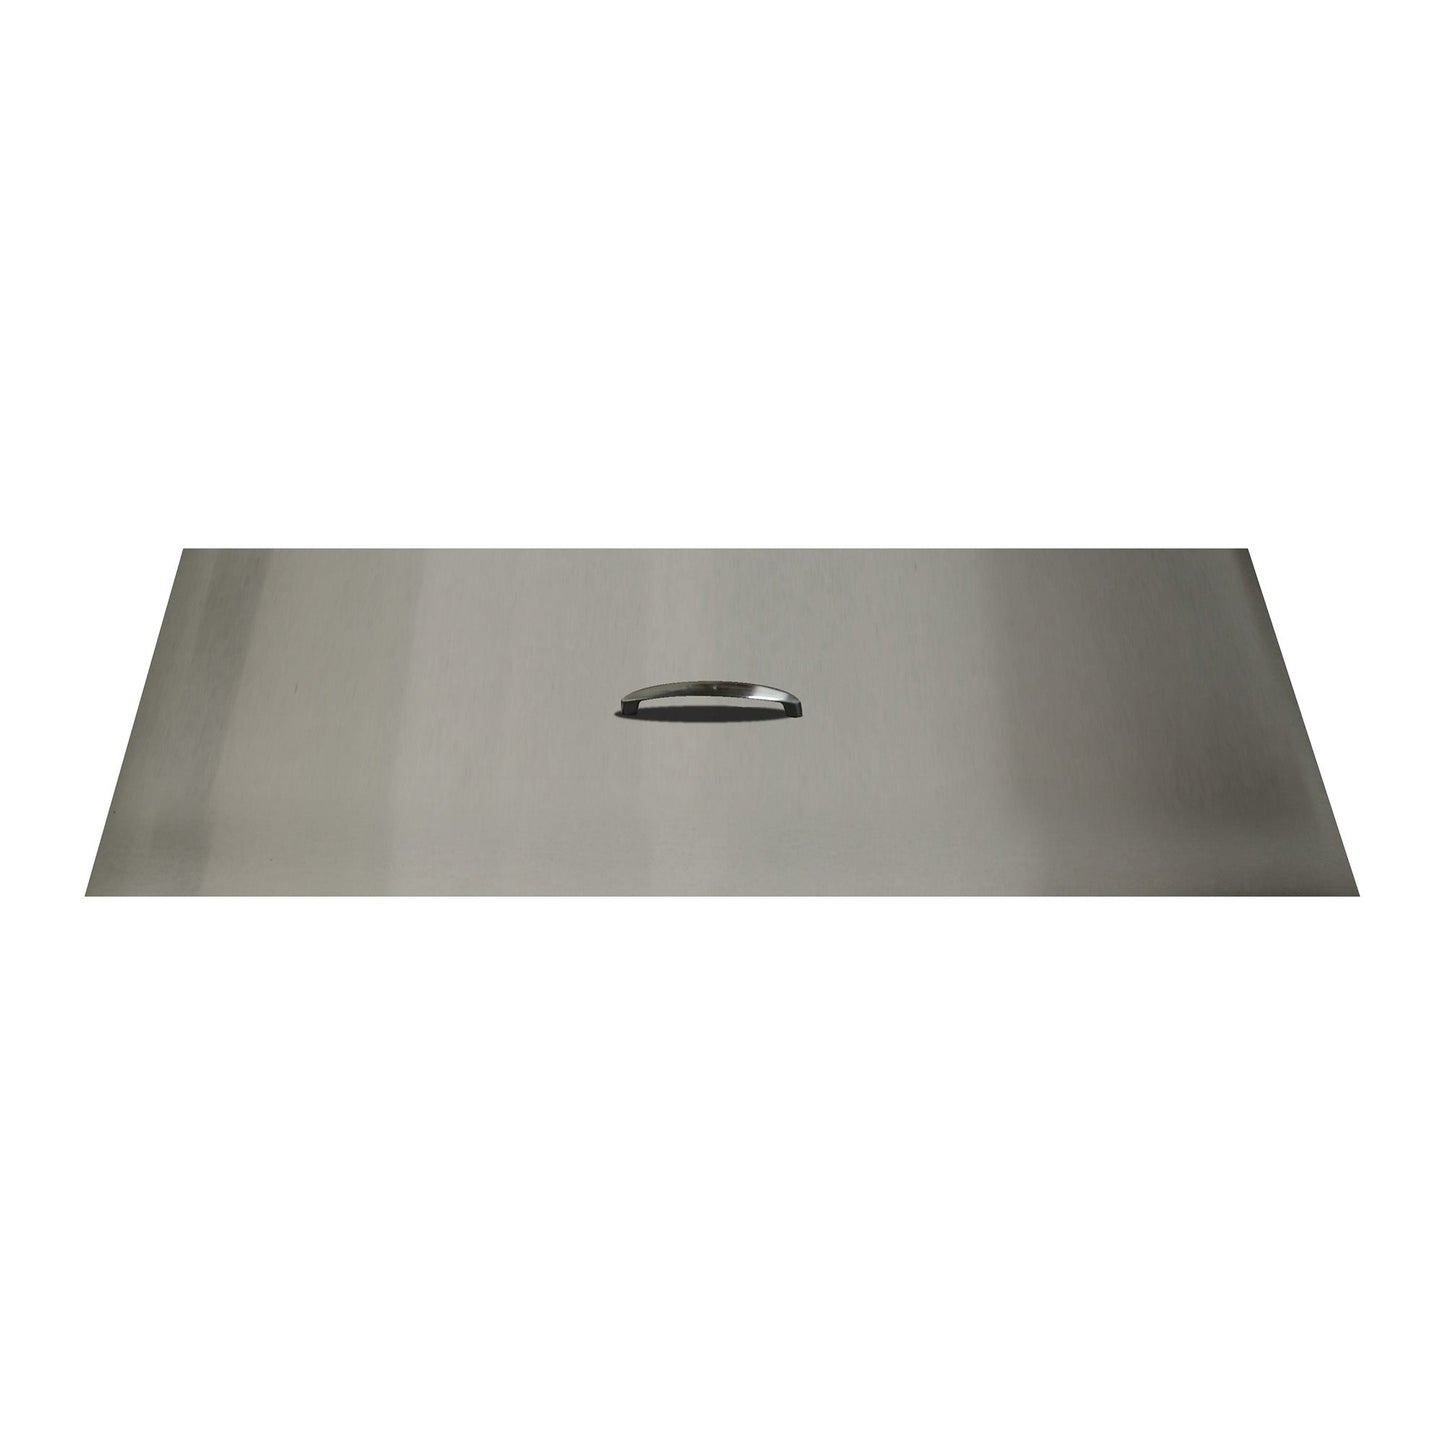 The Outdoor Plus Dixie 10" x 50" Stainless Steel Rectangular Fire Pit Lid Cover